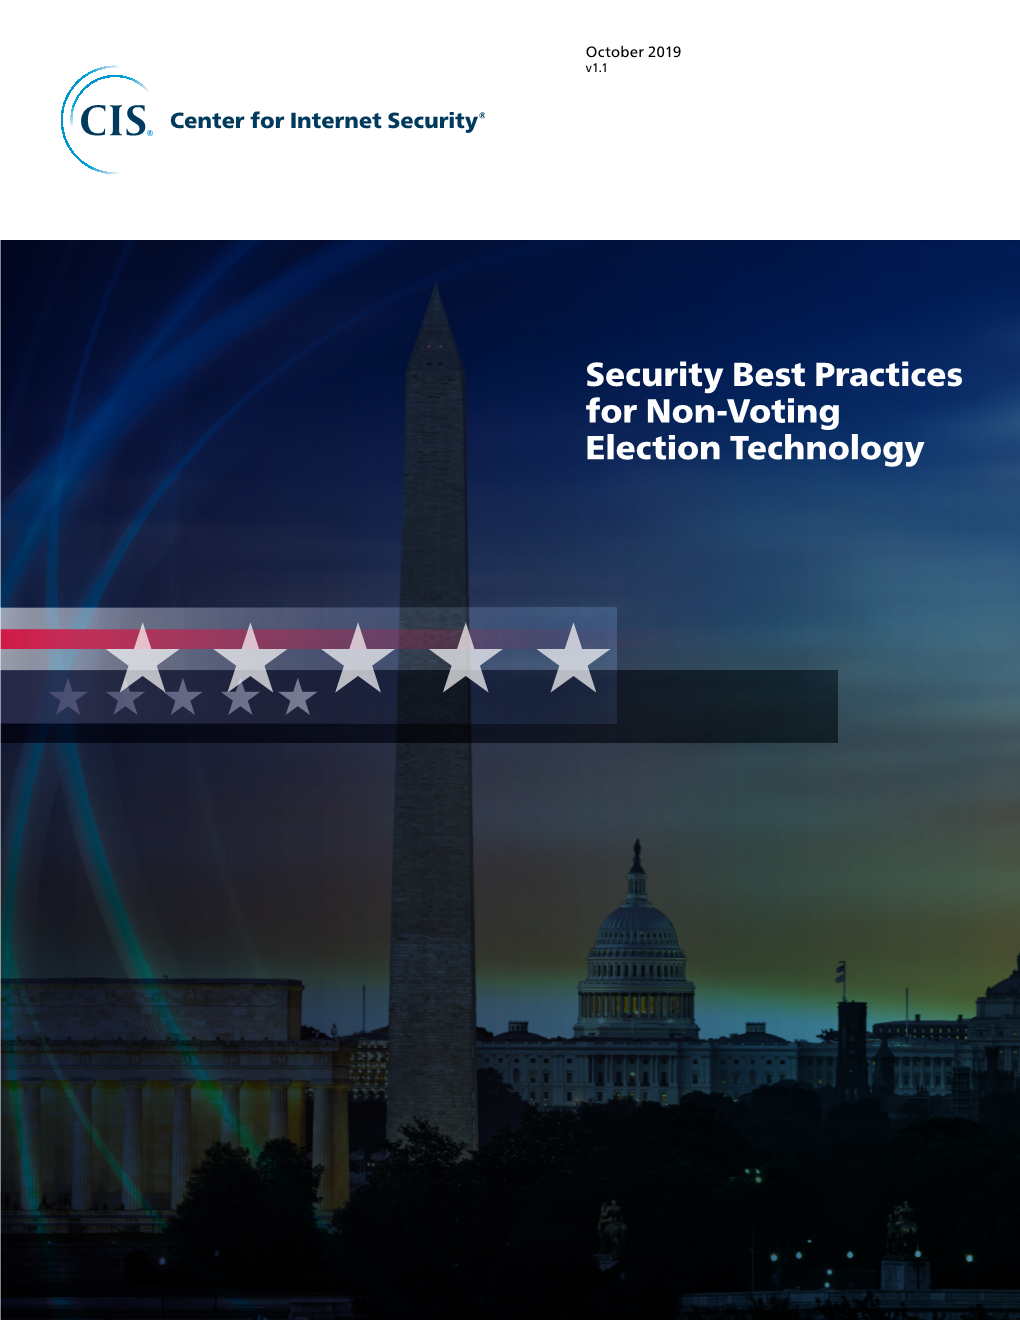 Security Best Practices for Non-Voting Election Technology